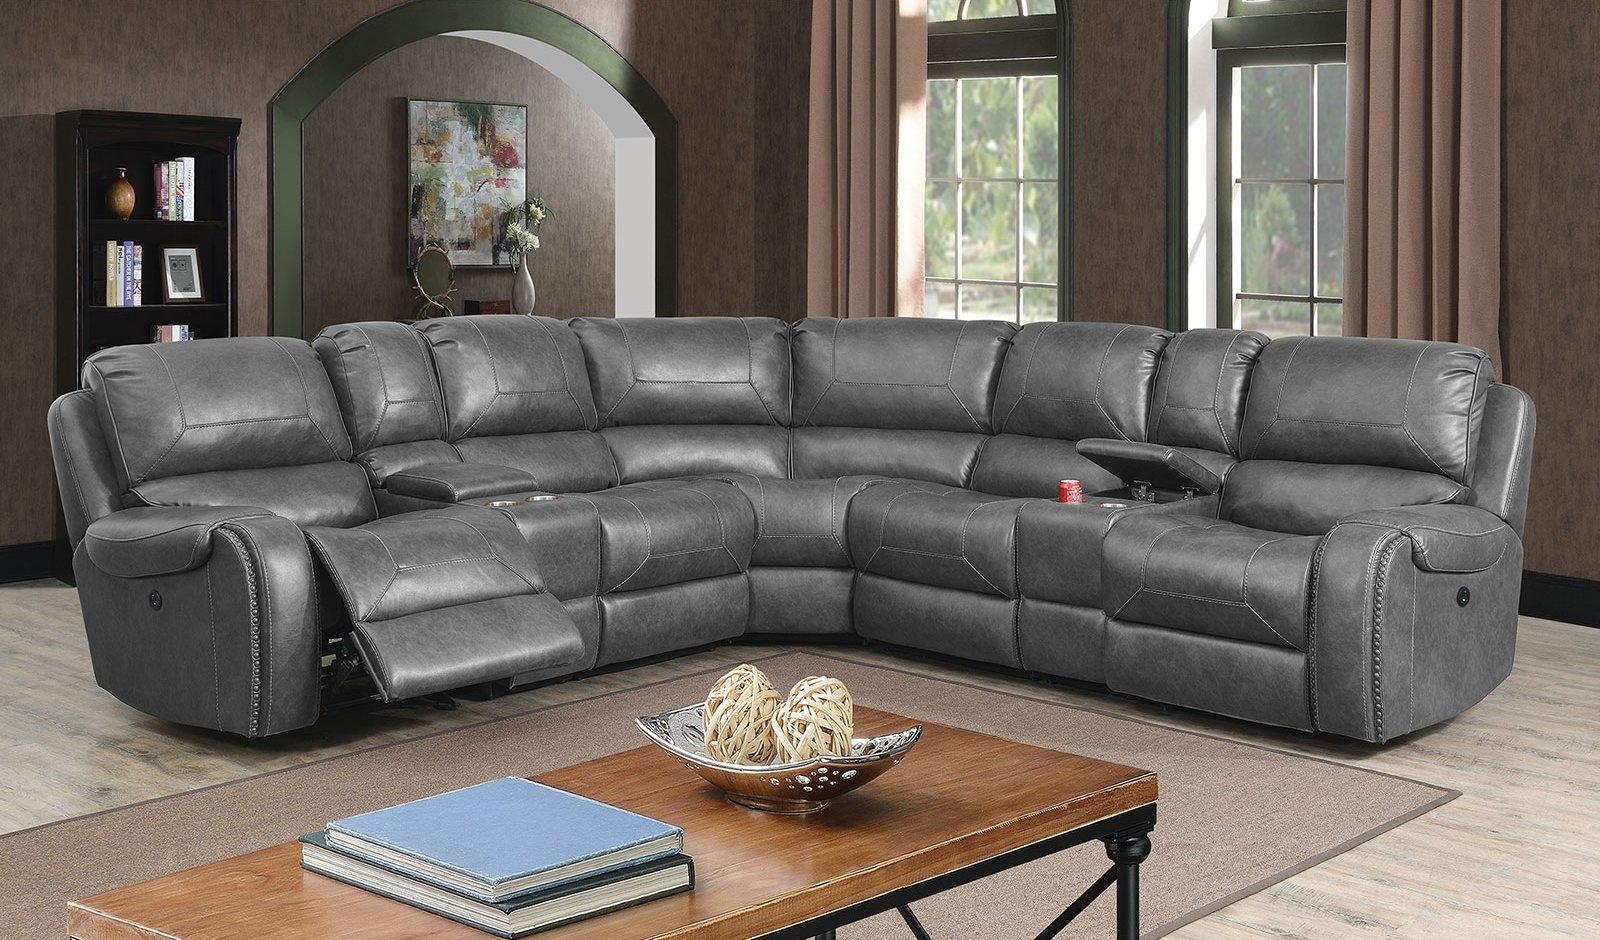 Transitional Power Sectional CM6951GY-PM-SECT Joanne CM6951GY-PM-SECT in Gray Leatherette